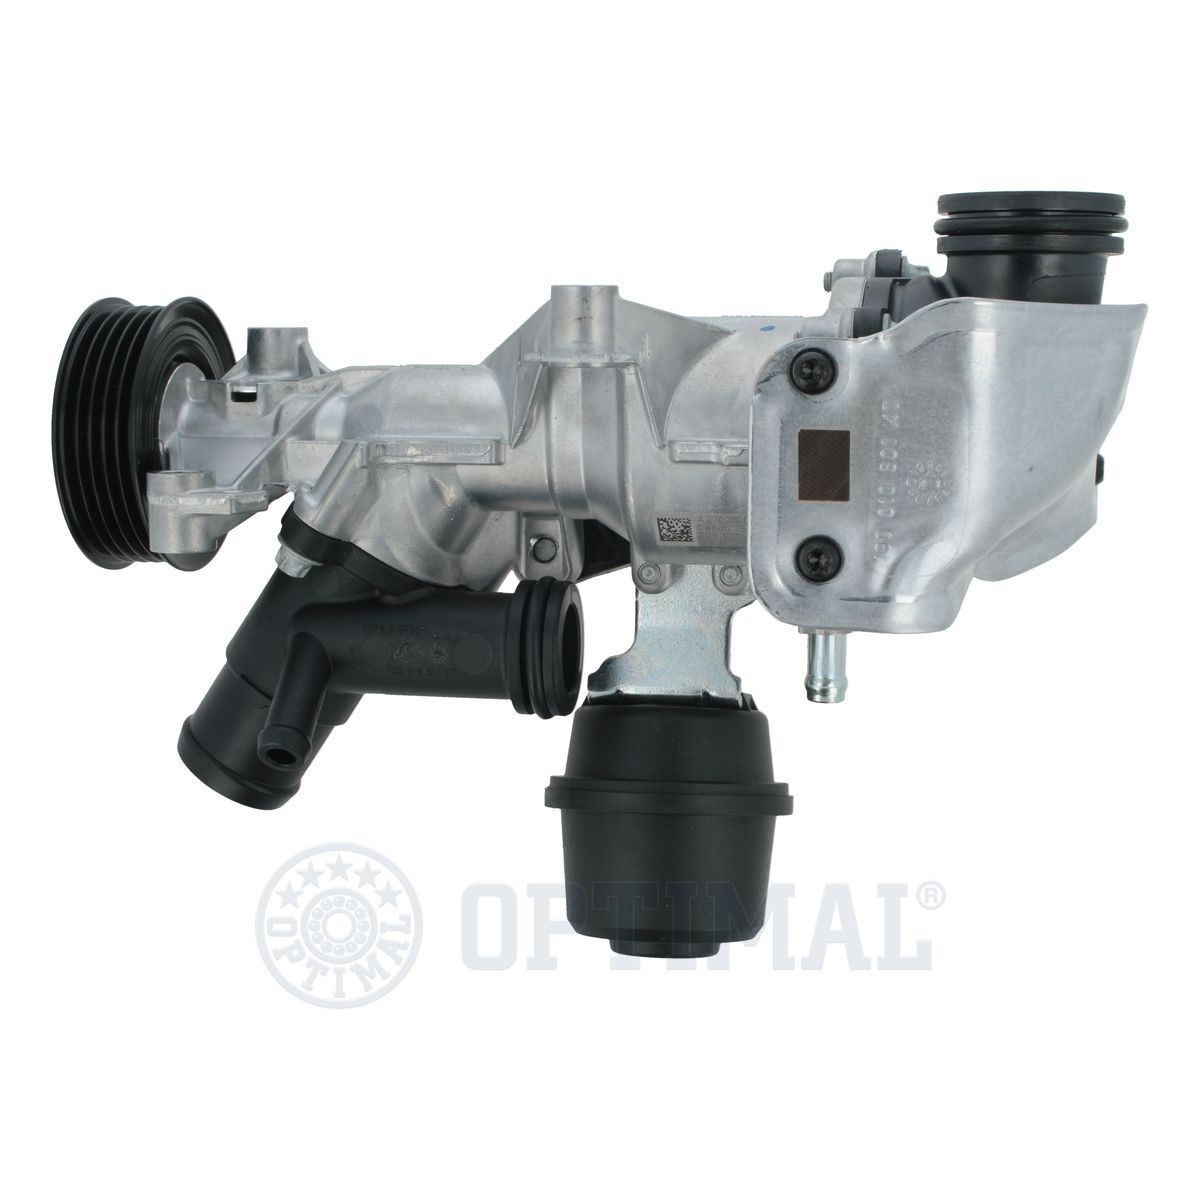 OPTIMAL Water pump for engine AQ-2335 for Chrysler Grand Voyager RT